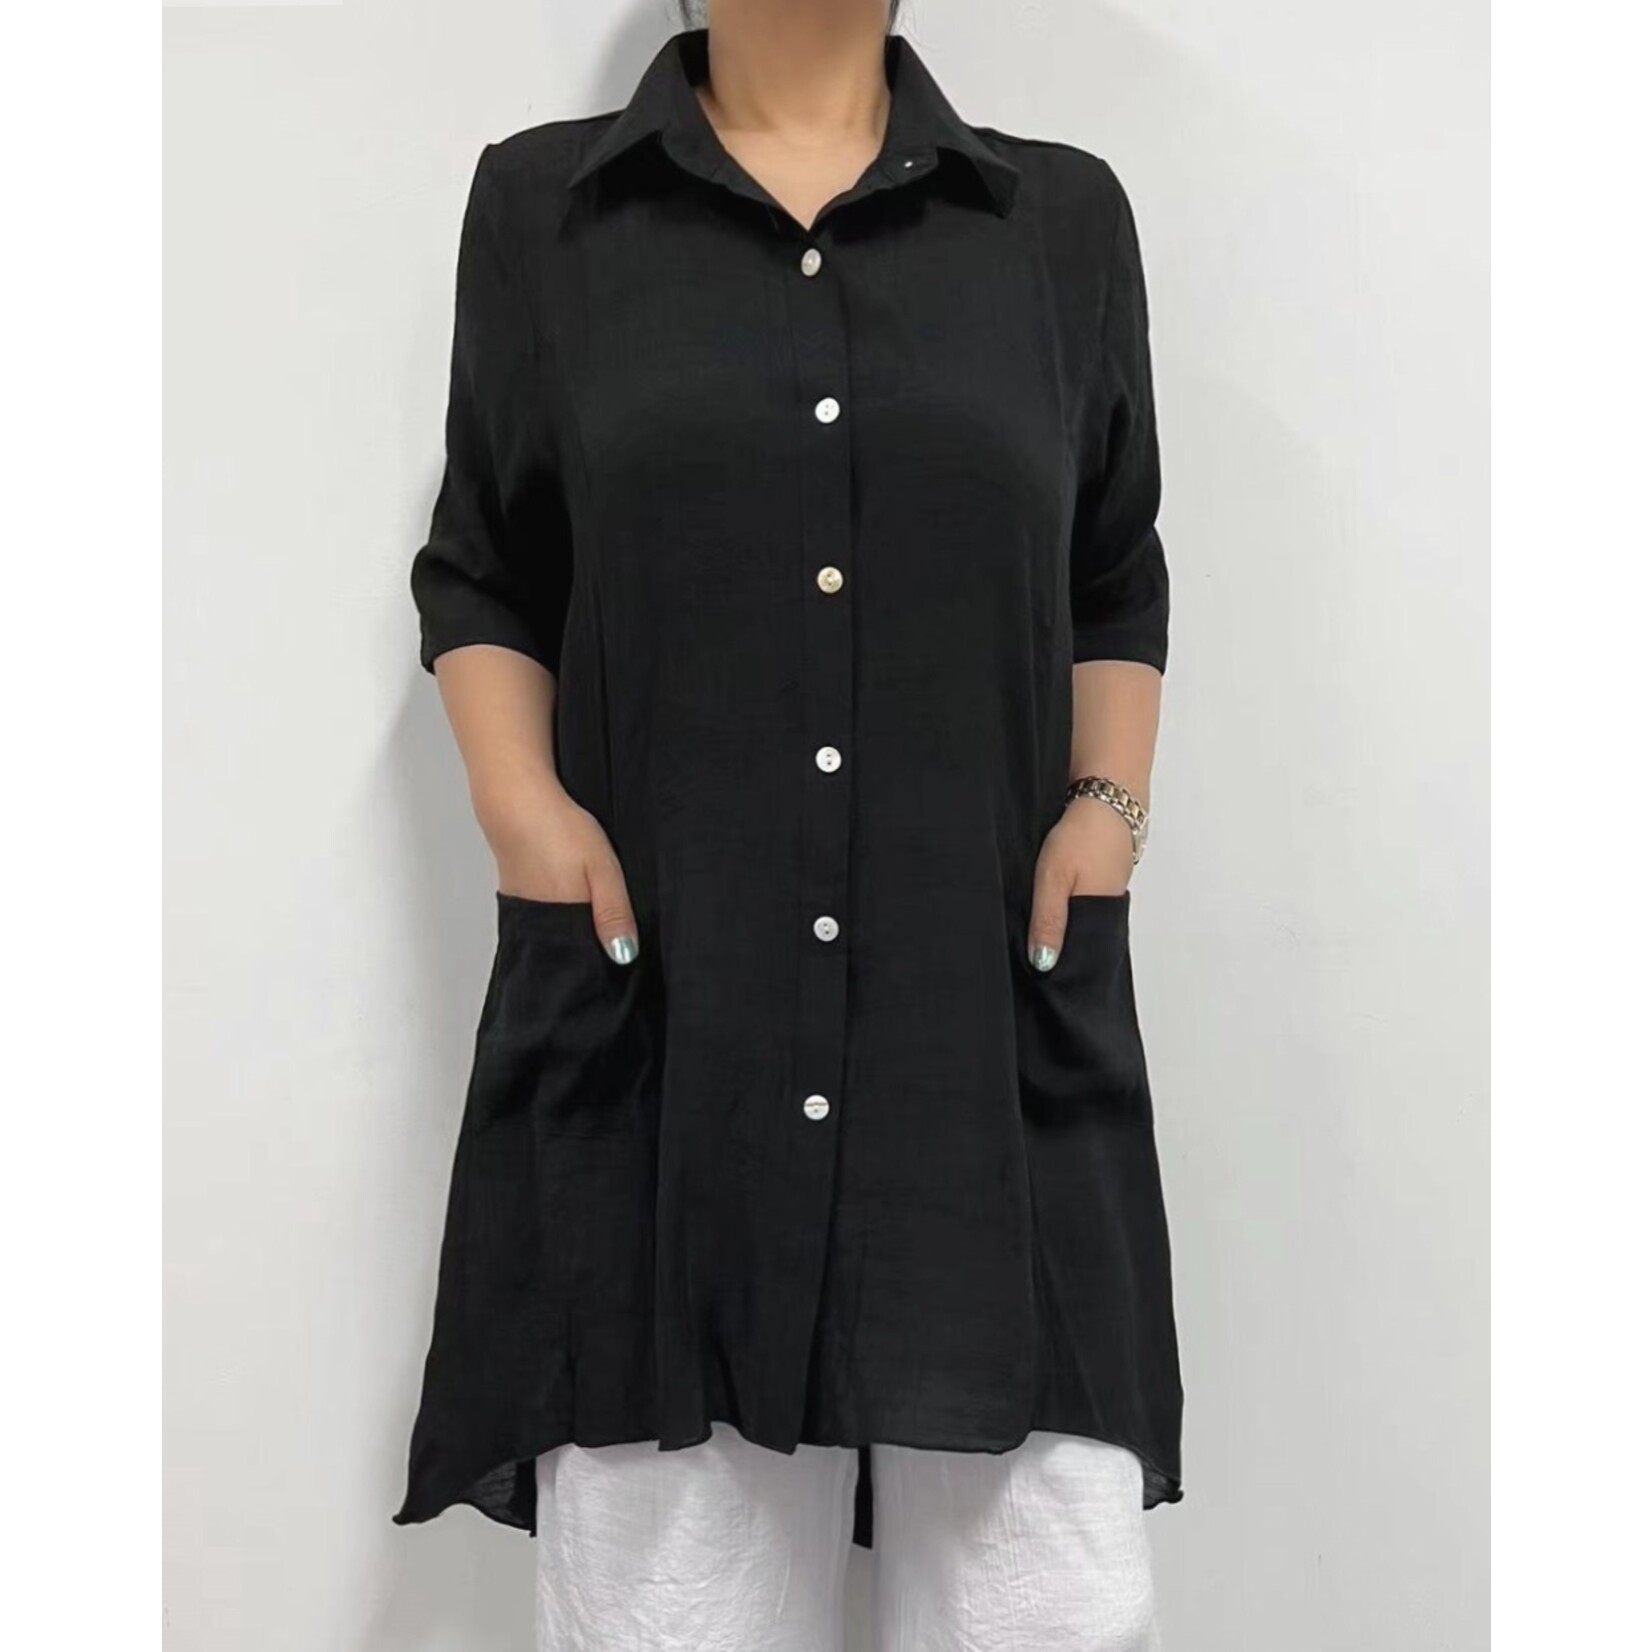 Creations short sleeve long button blouse cover up with pockets,  blouses, shirt, top